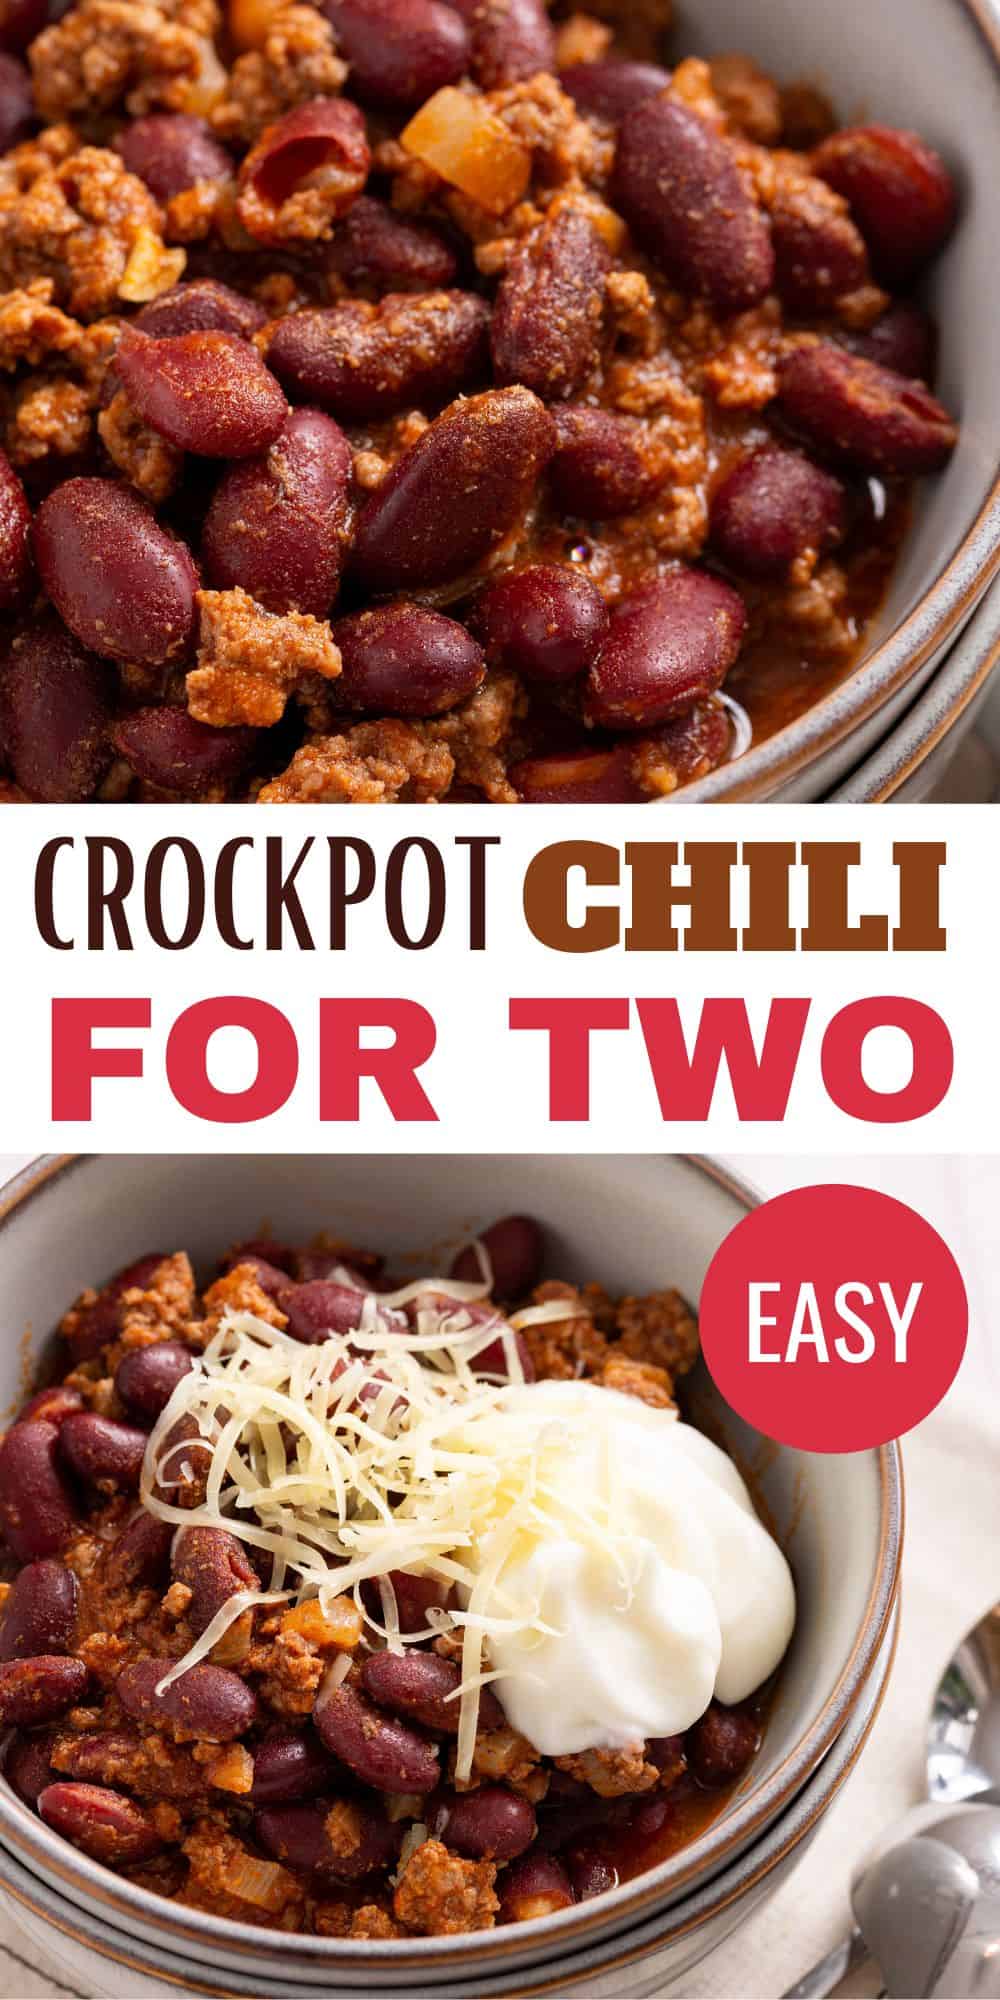 Crockpot chili for two is served in a bowl with sour cream.